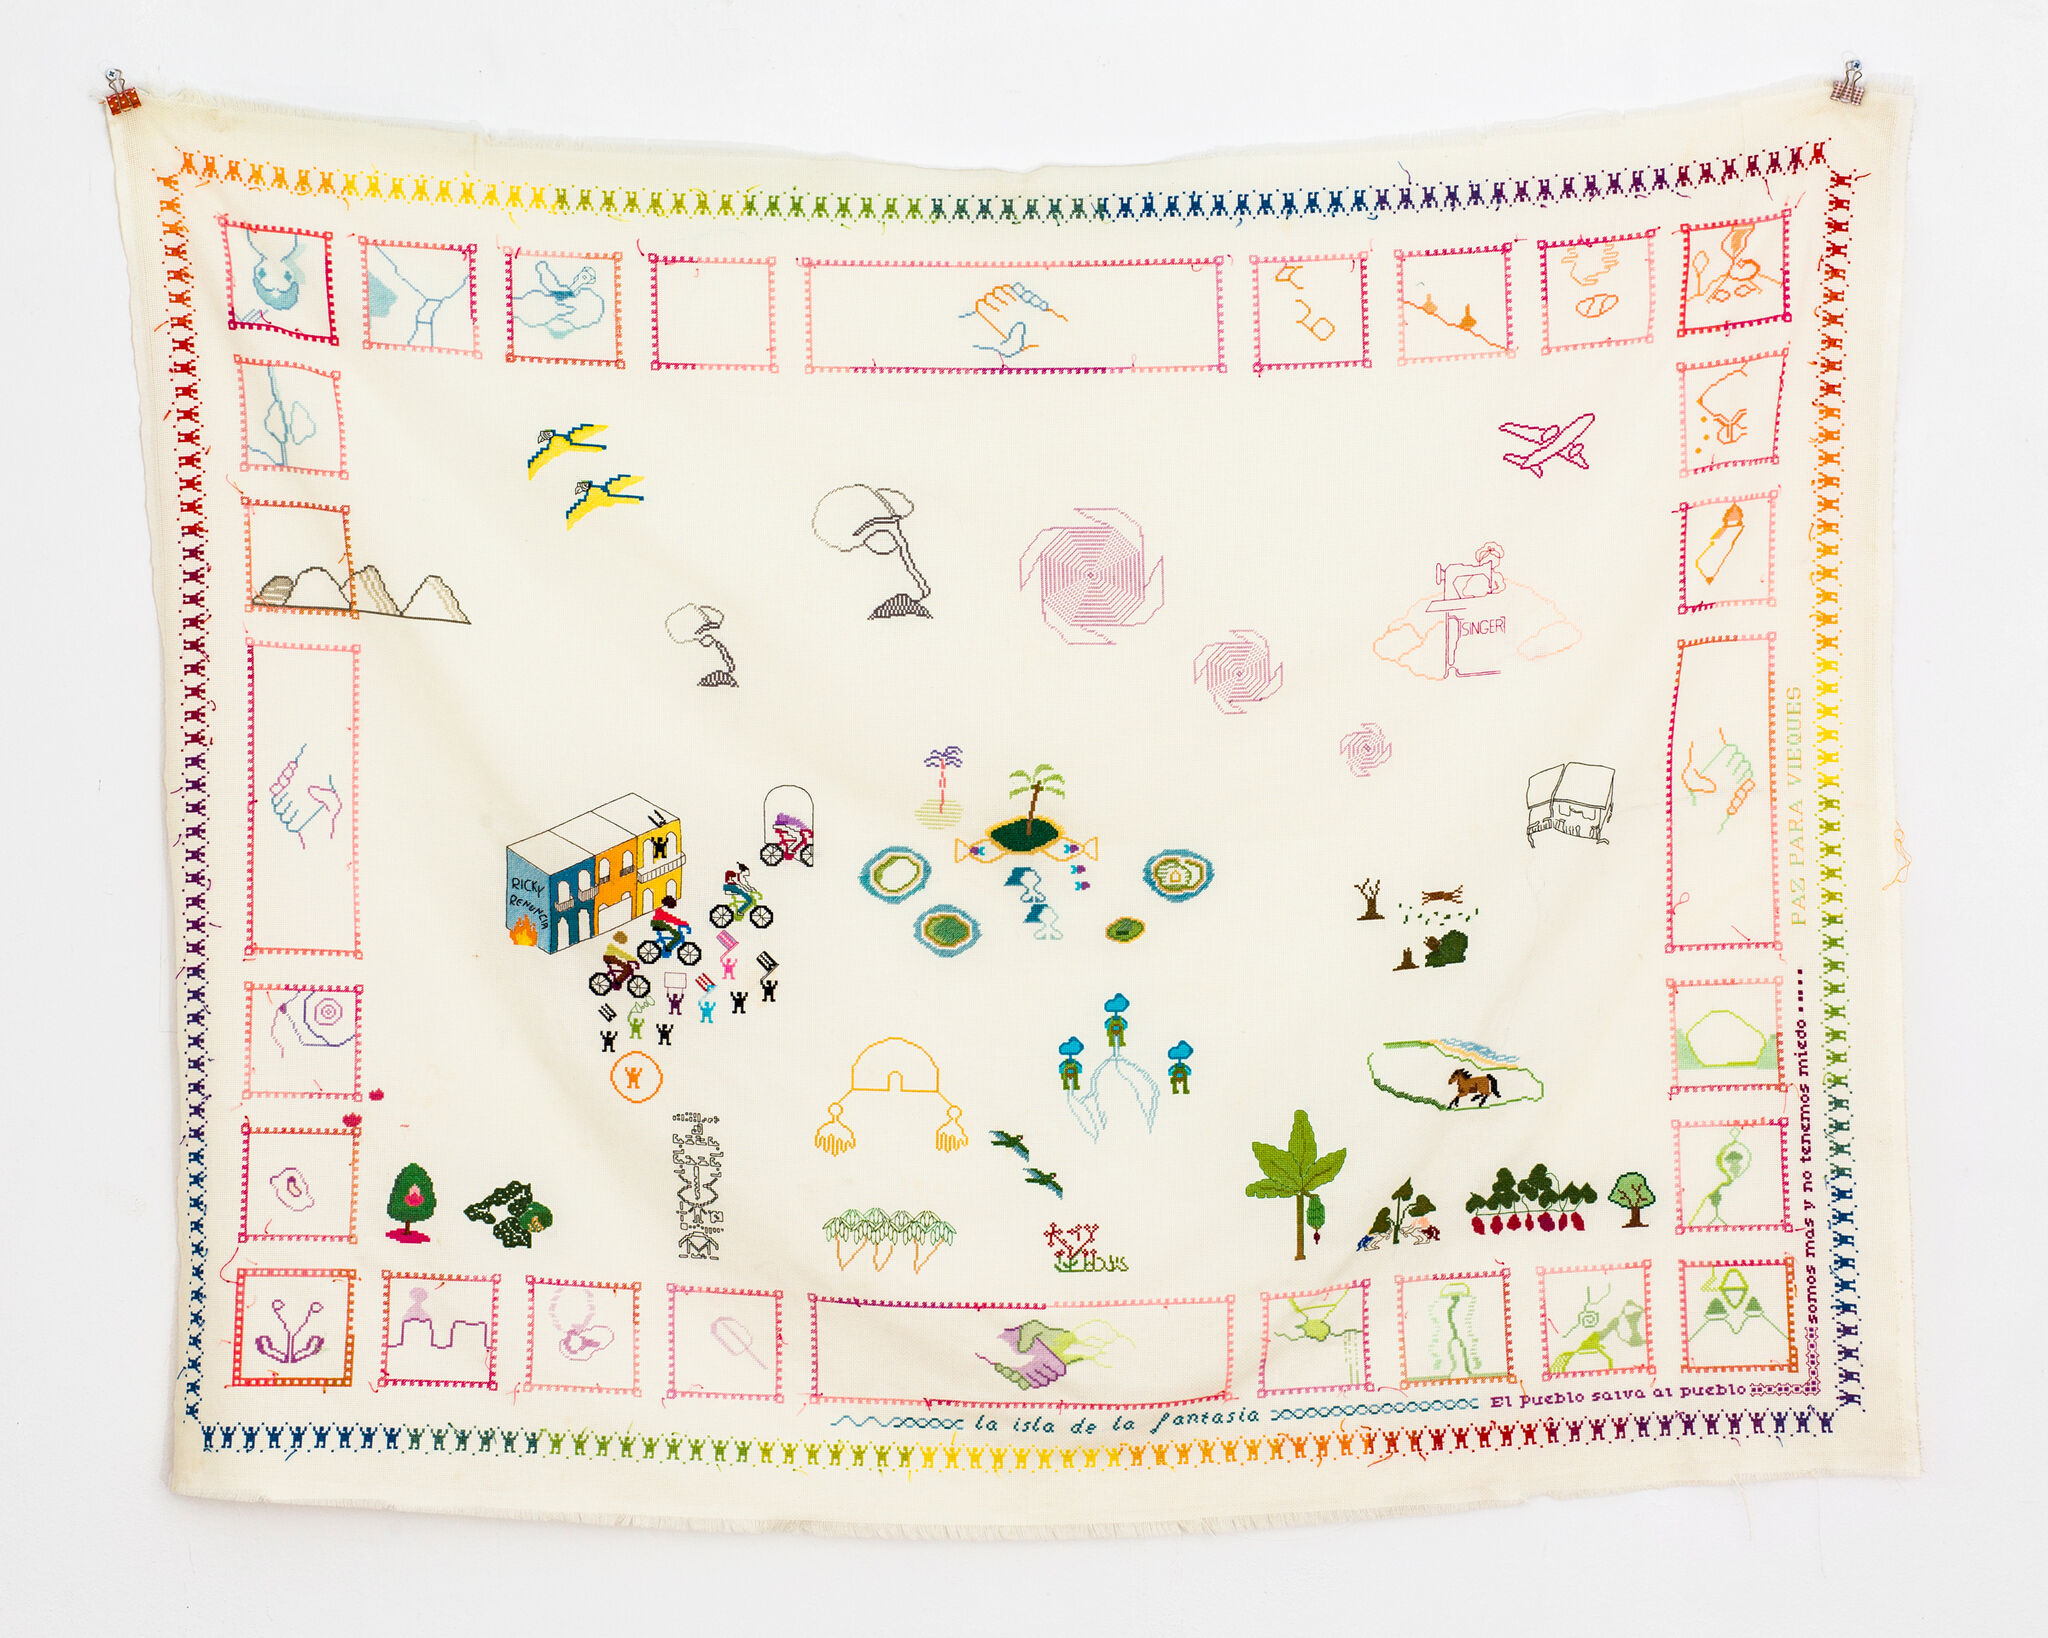 A colorfully-embroidered map.